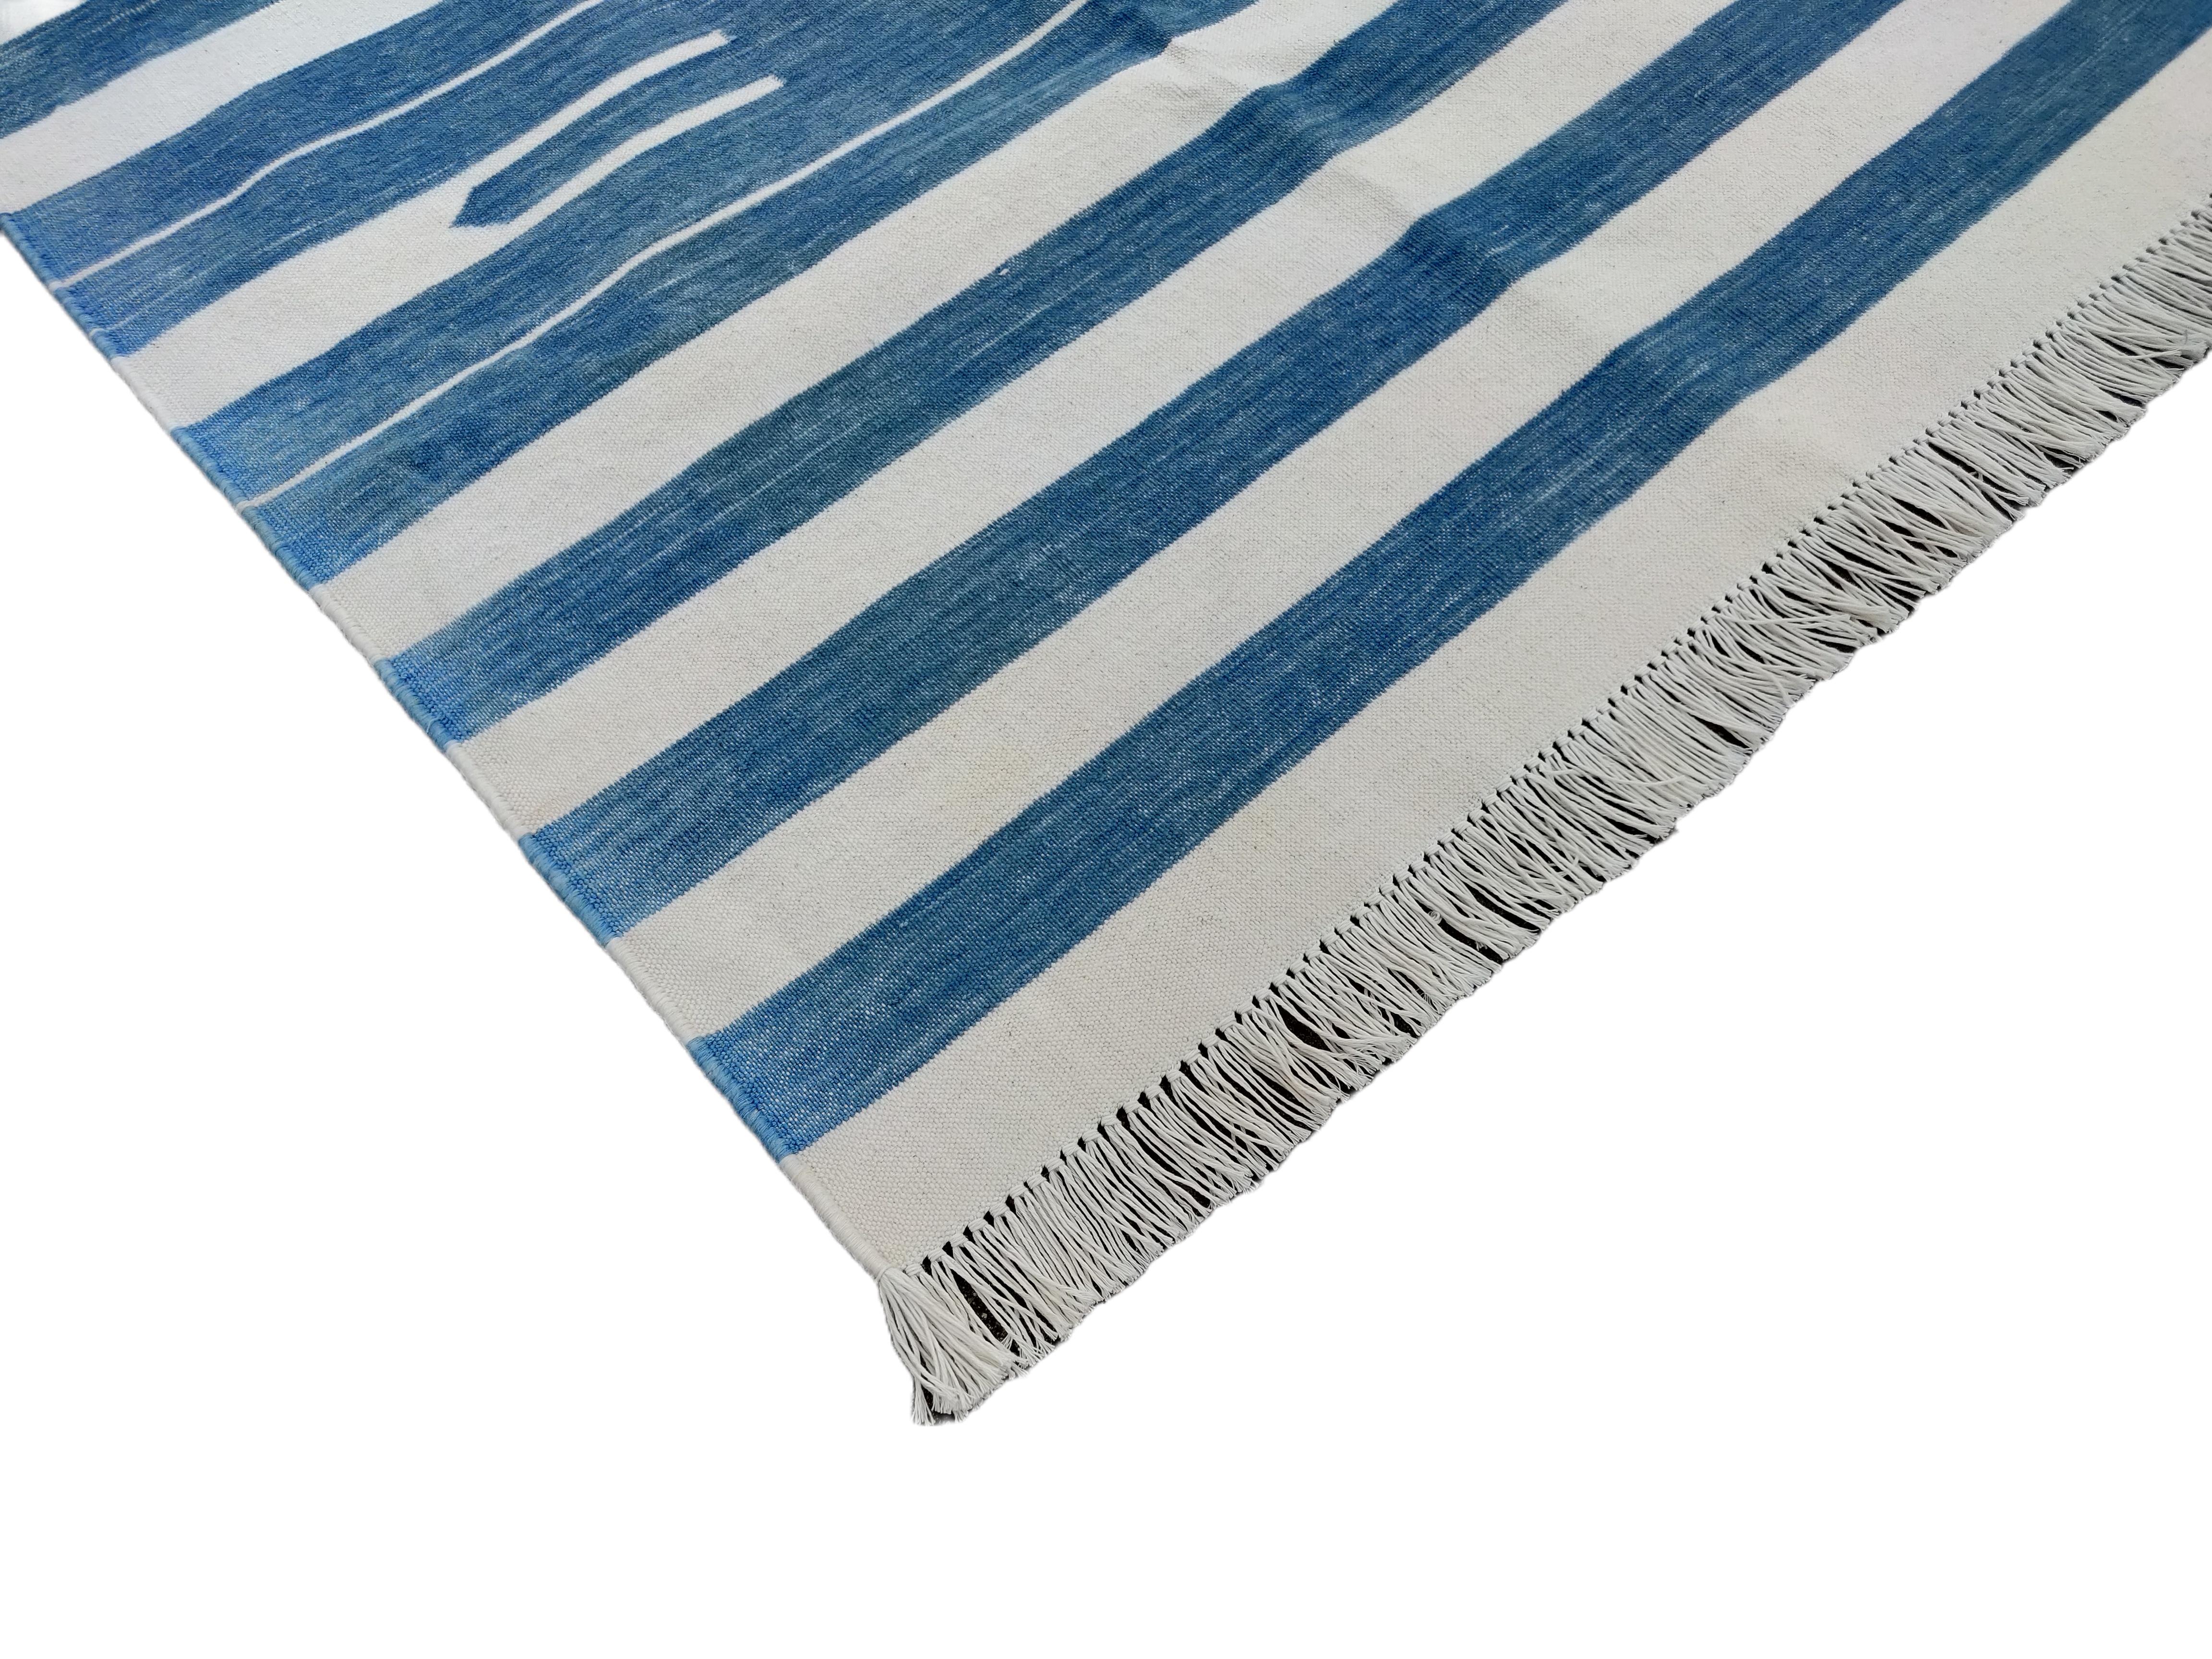 Contemporary Handmade Cotton Area Flat Weave Runner, 3x8 Blue And White Striped Dhurrie Rug For Sale